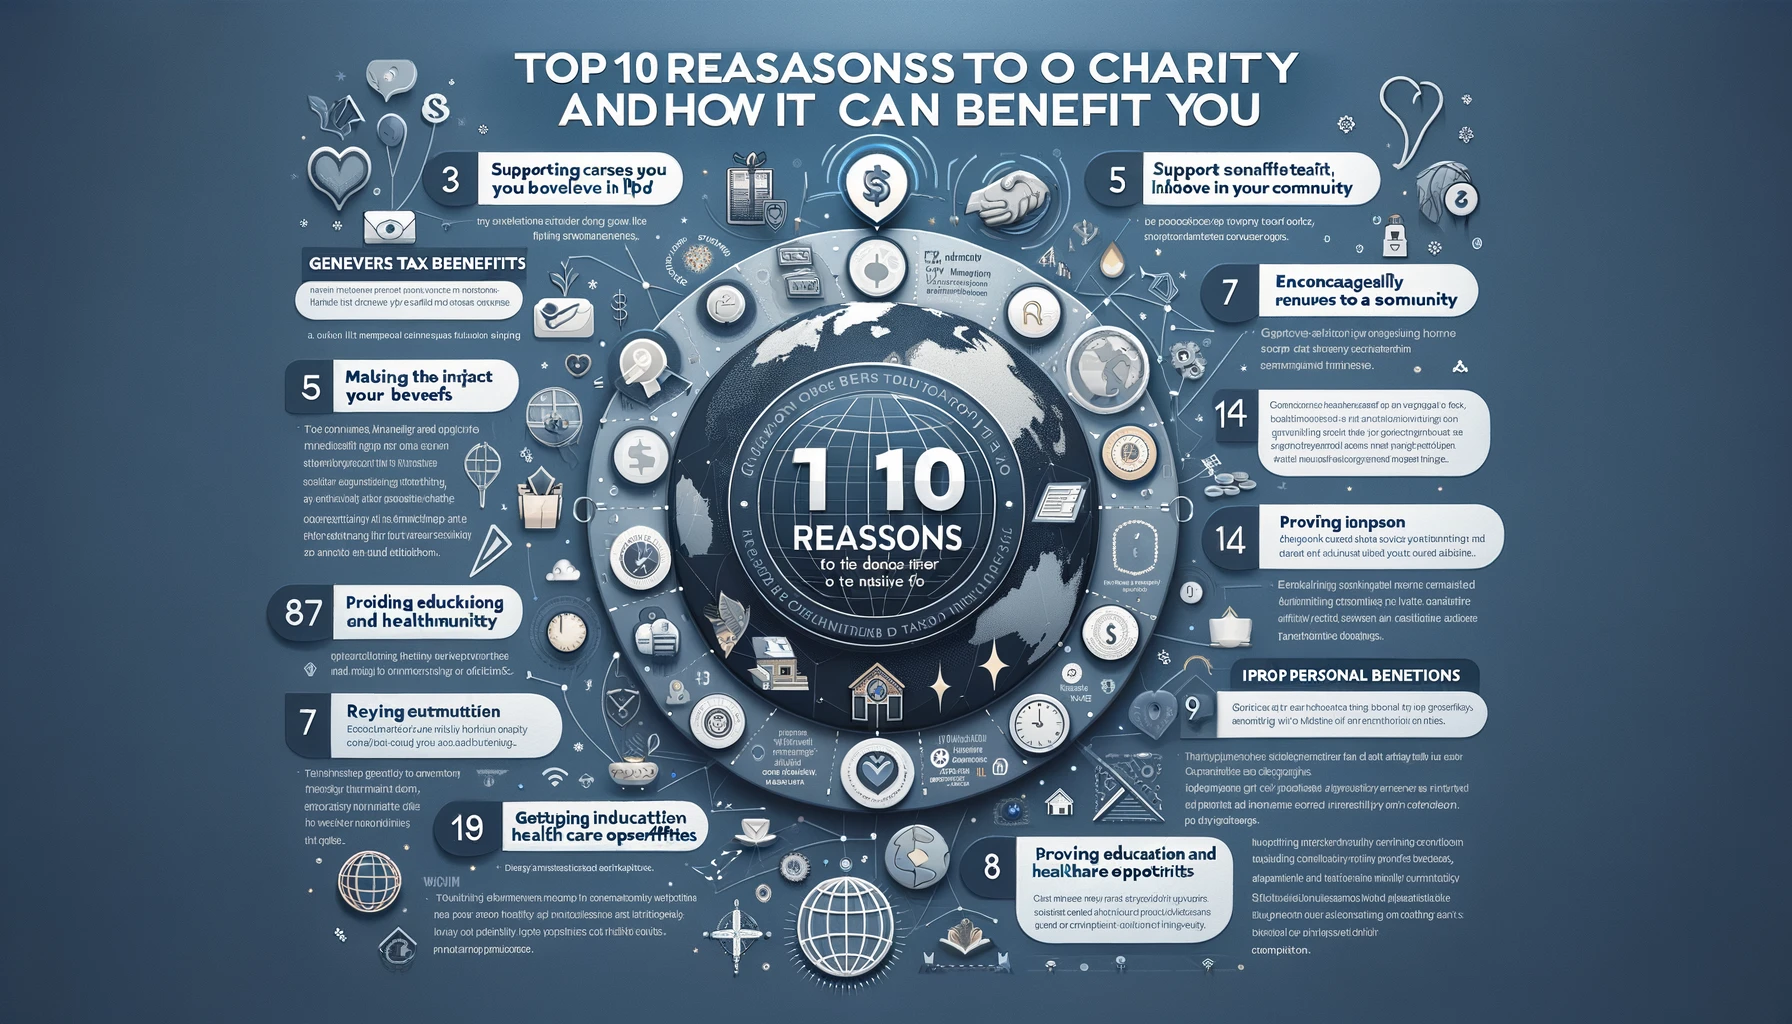 Top 10 Reasons to Donate to Charity and How It Can Benefit You